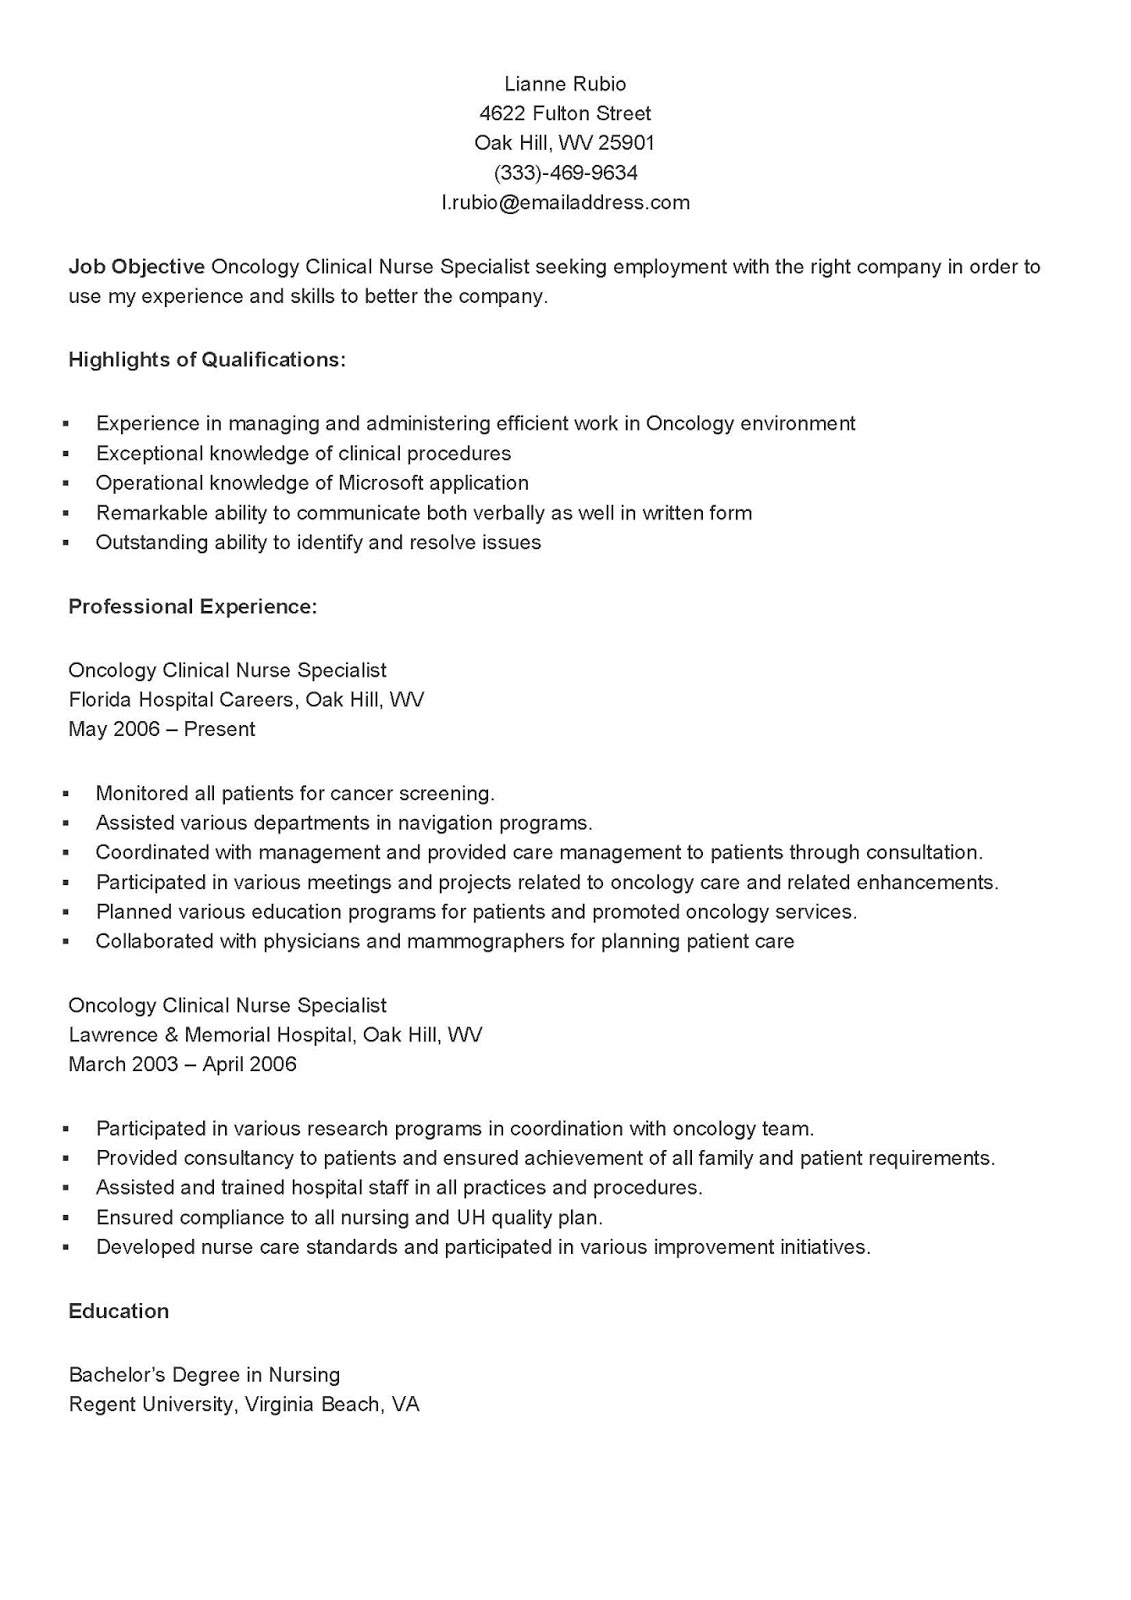 Application support resume objective